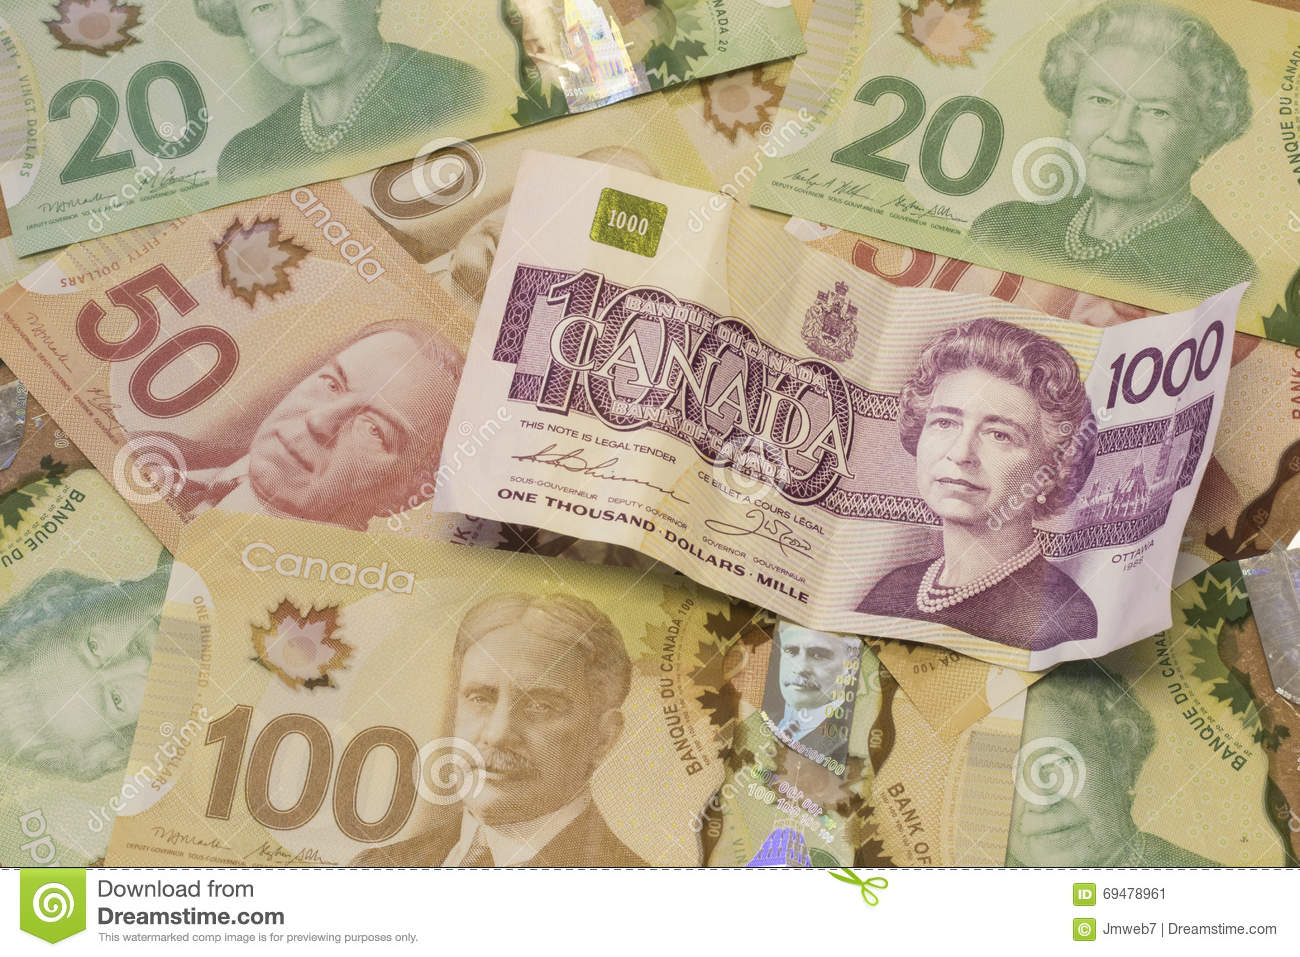 Nice Images Collection: Canadian Dollar Desktop Wallpapers